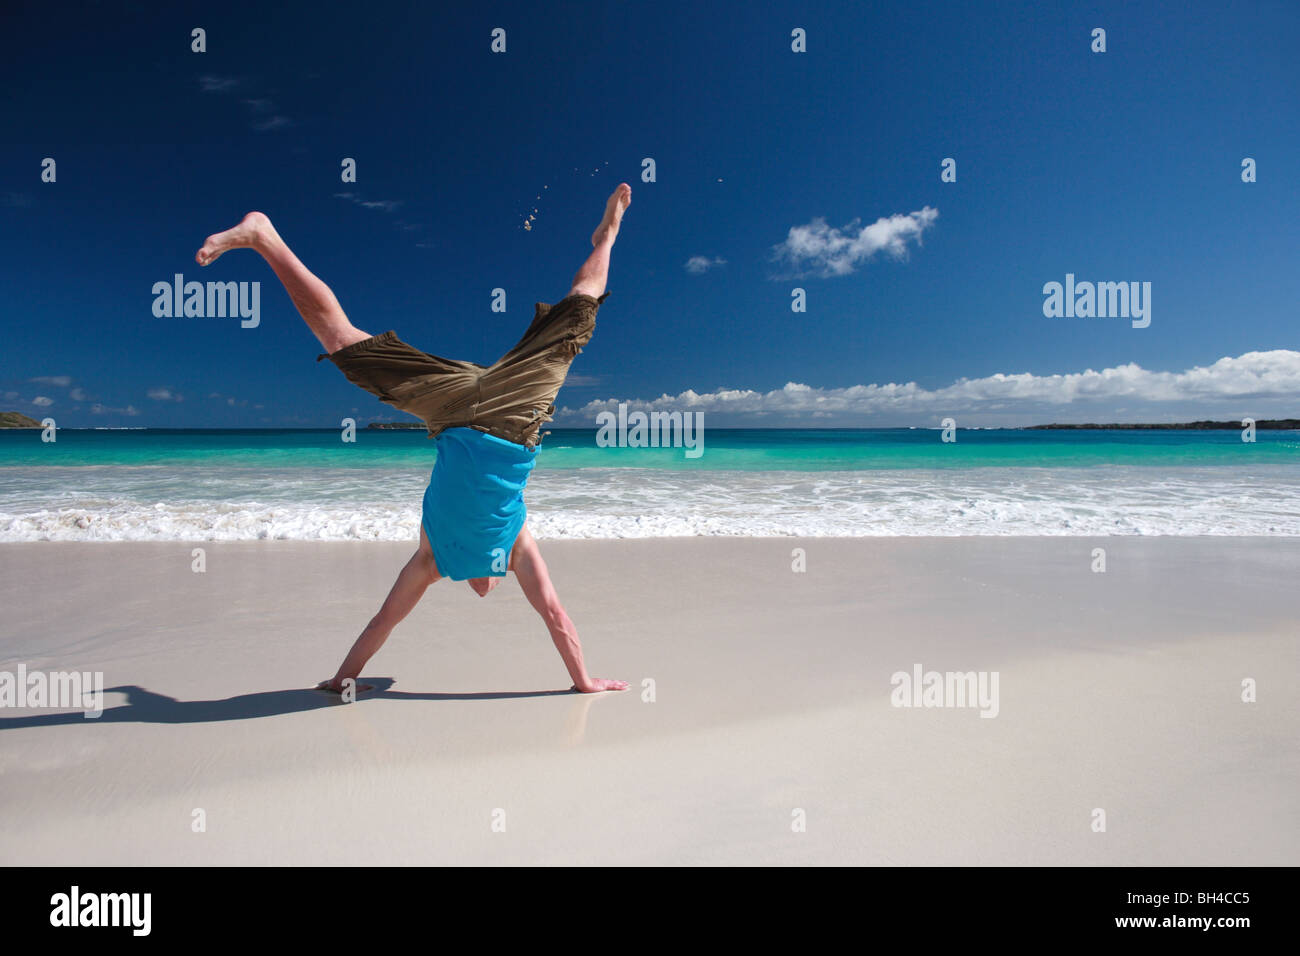 Young man performing a handstand on a deserted tropical beach Stock Photo